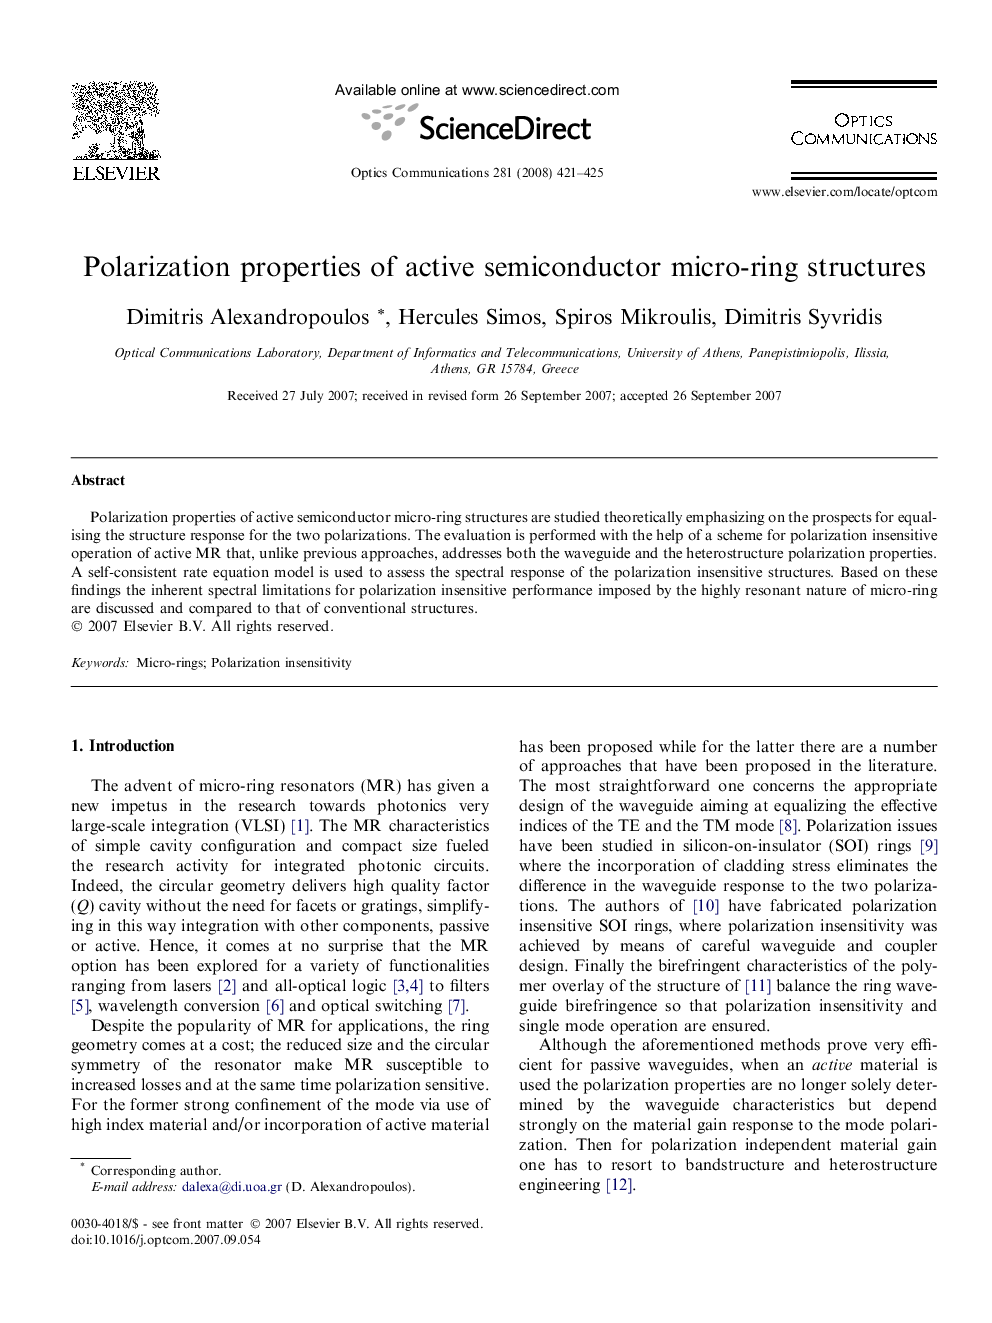 Polarization properties of active semiconductor micro-ring structures